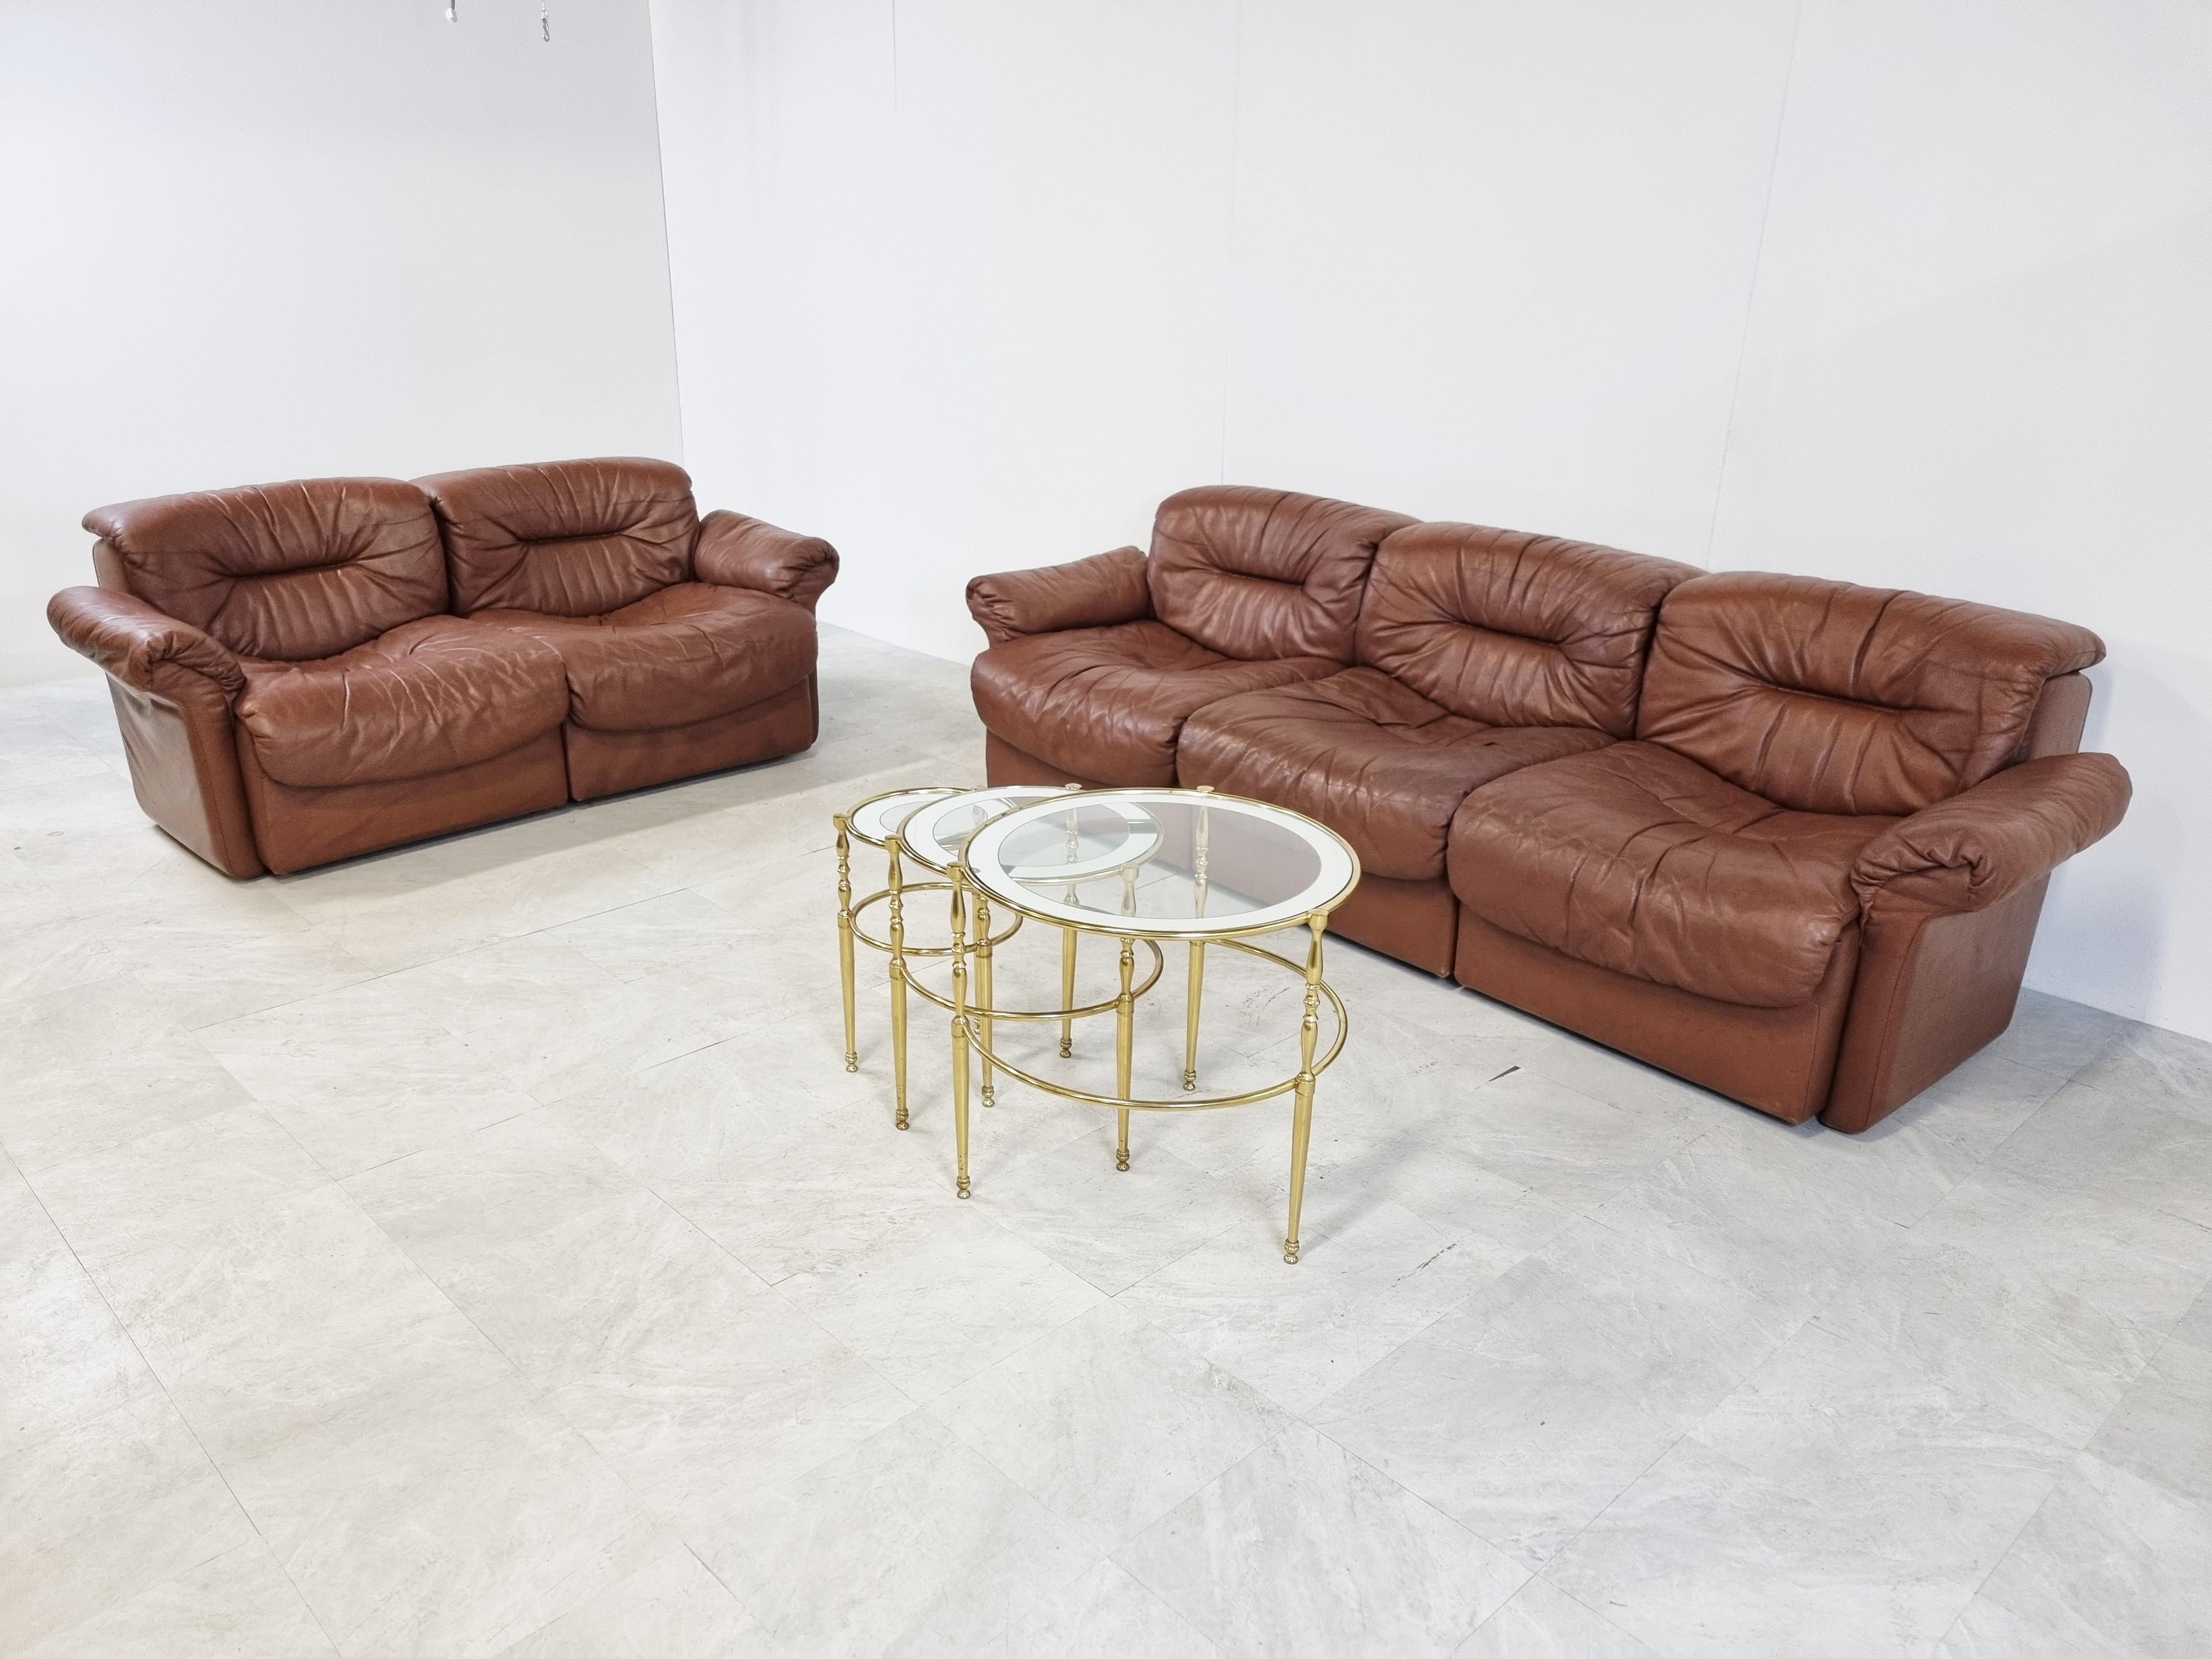 Mid century sofa set in brown leather by Desede model DS14

The set consists of a three seater bench and a two seater bench with armrests.

Nice quality leather, as you would expect from Desede. 

Good original condition, with some lovely